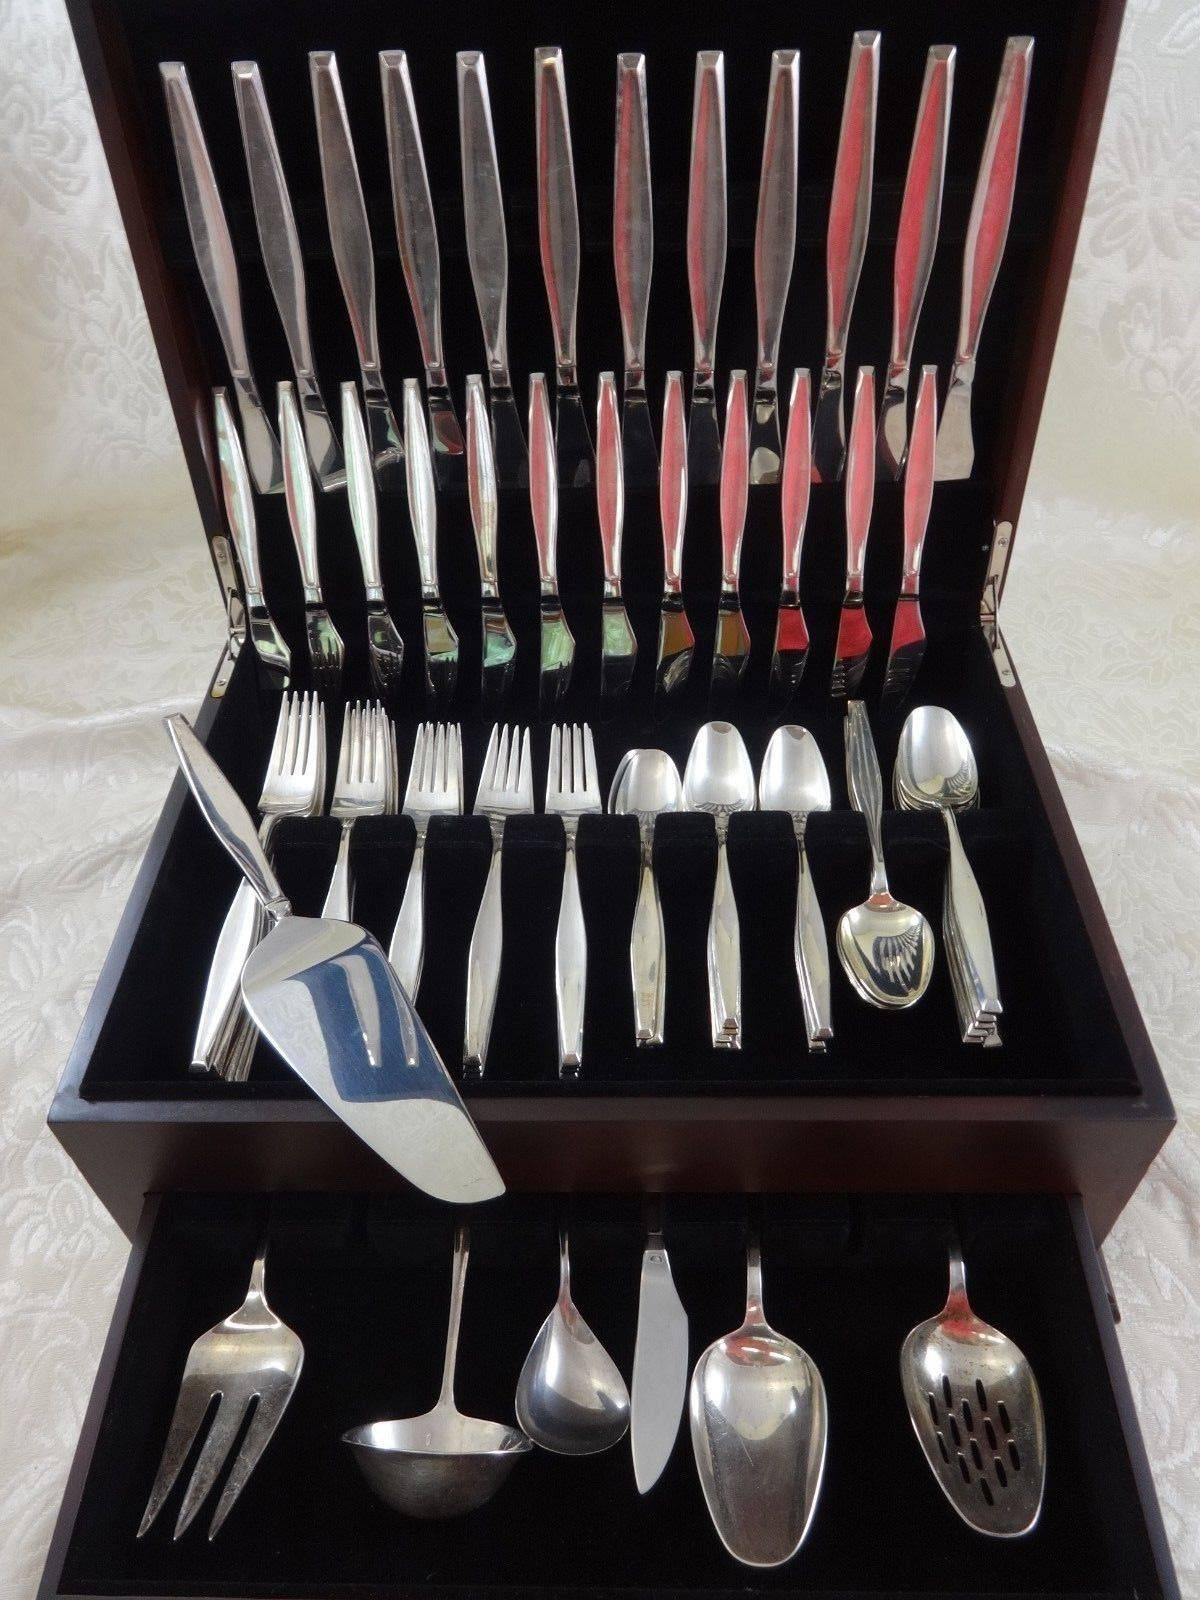 Classique by Gorham sterling silver flatware set, 103 pieces. This pattern was designed by Burr Sebring. Sebring studied metalsmithing with famed designers John Prip and Hans Christensen at the School for American Craftsmen. This set includes: 

12